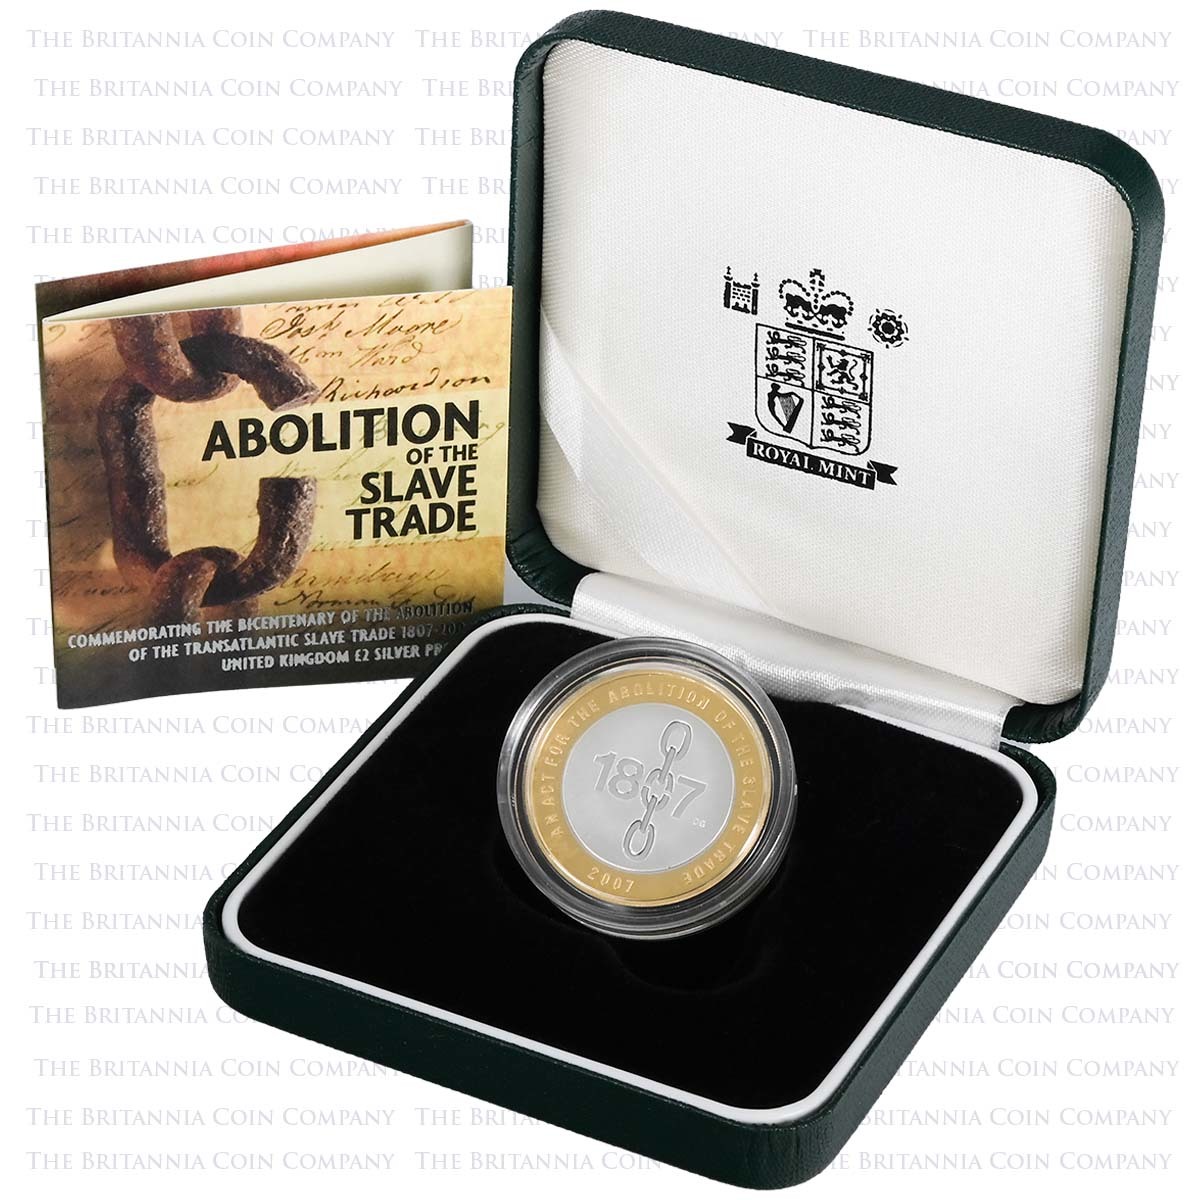 UKASTSP 2007 Abolition Of The Slave Trade 200th Anniversary Two Pound Silver Proof Coin Boxed